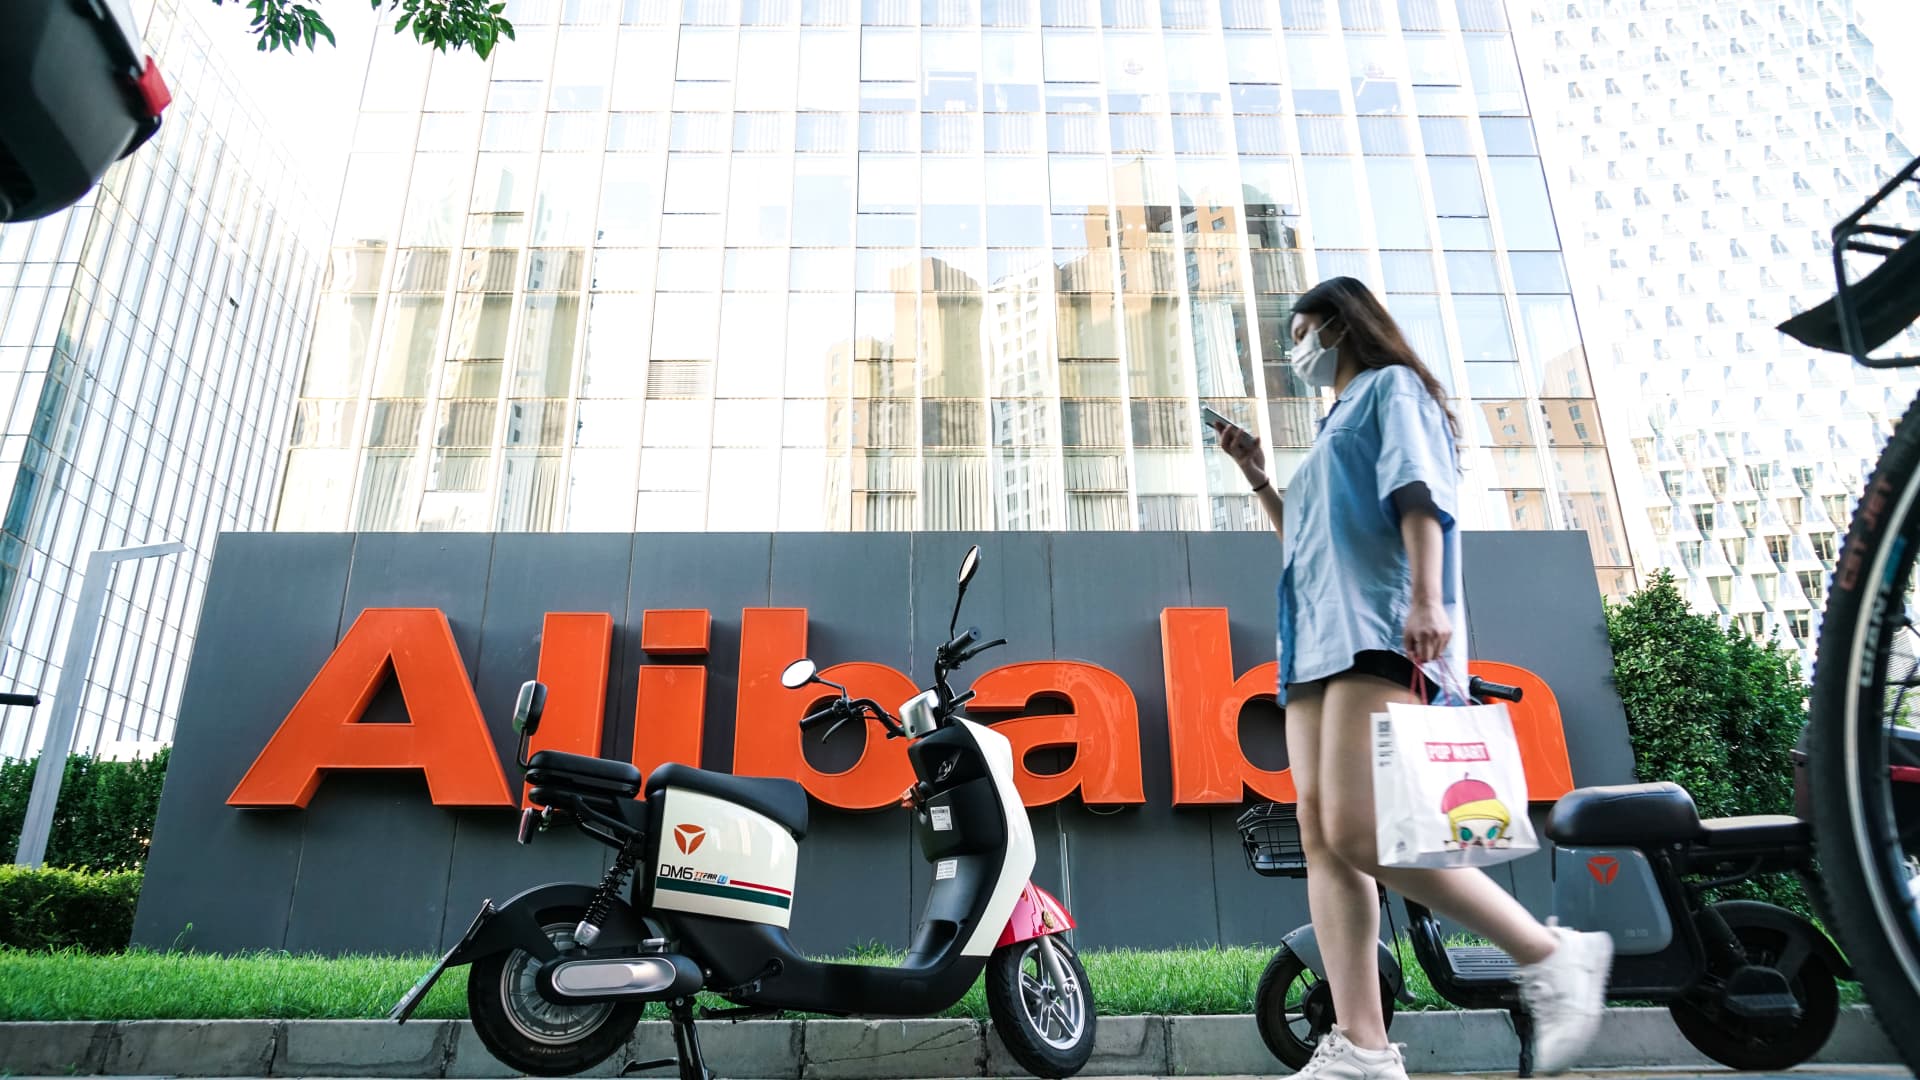 Alibaba says it will split into 6 units that can raise funds and IPO